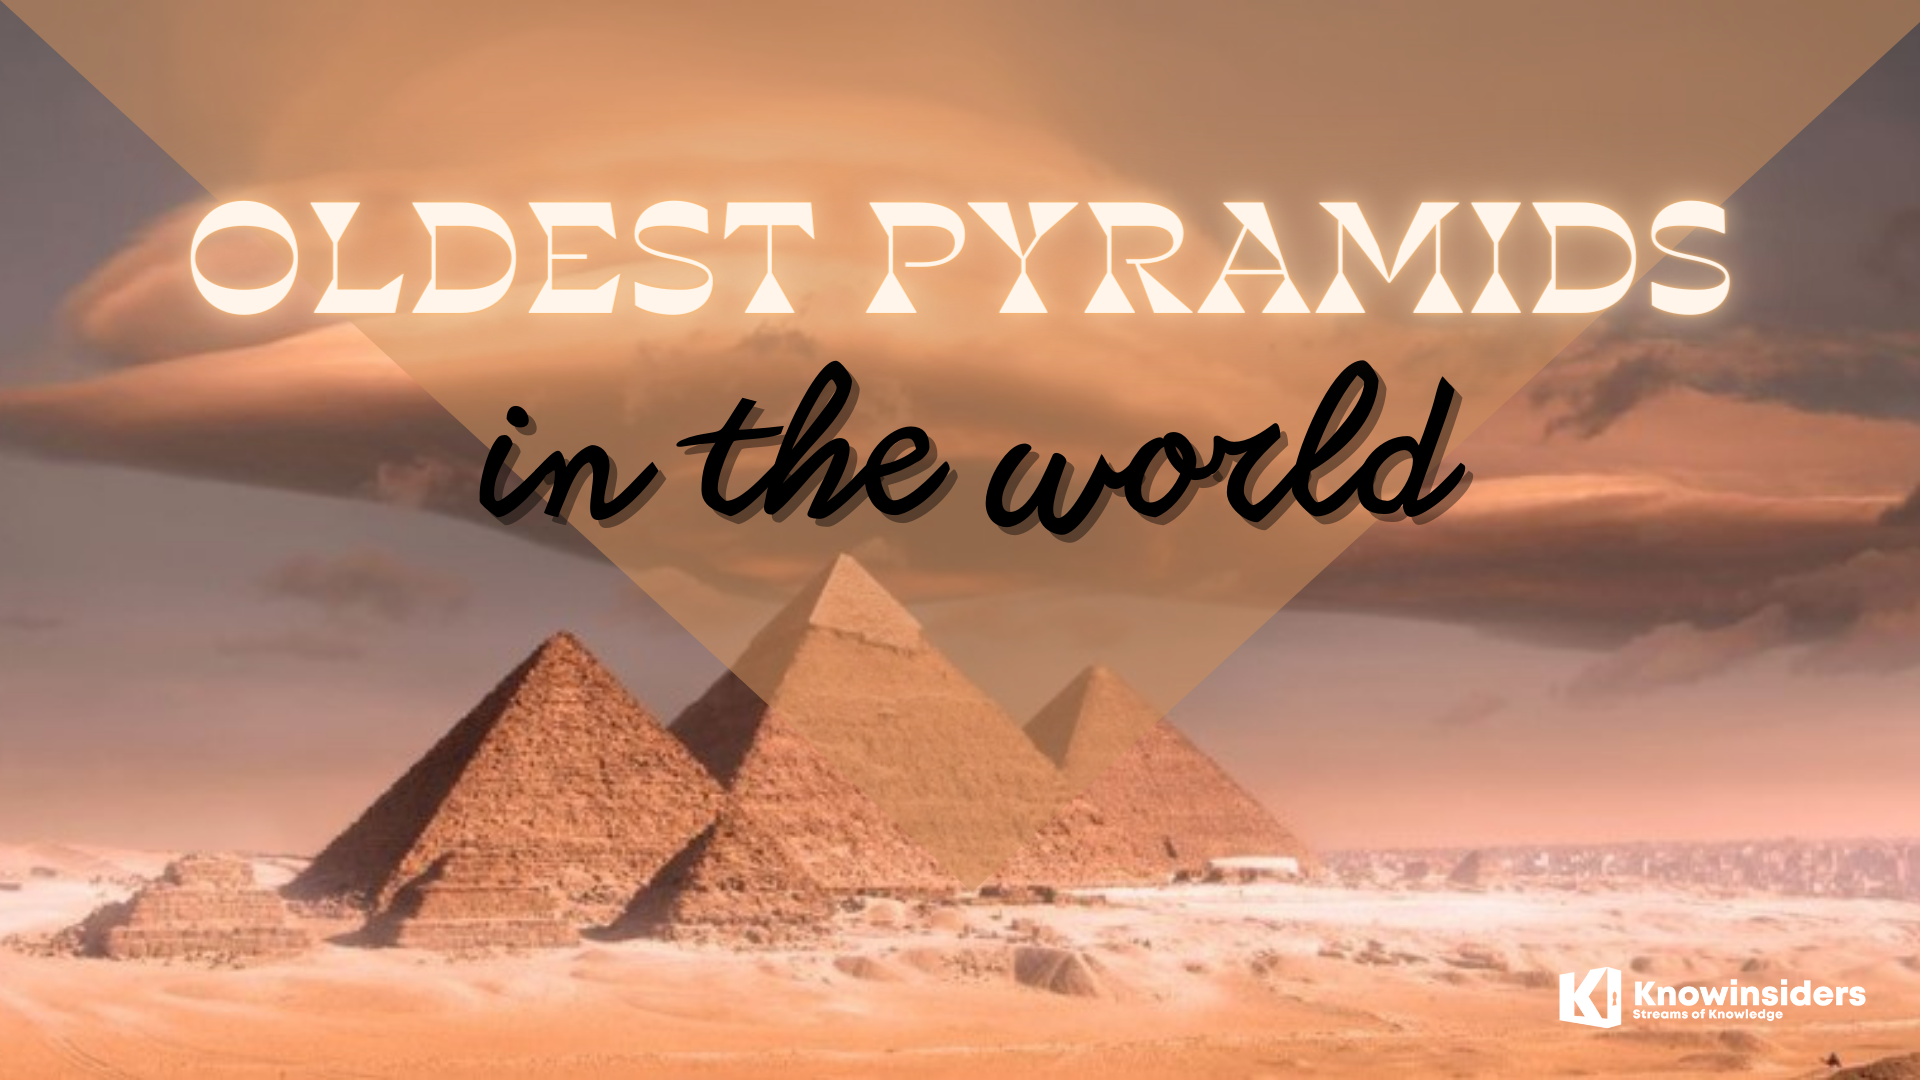 Top 7 Oldest Pyramids In The World - The First Pyramids